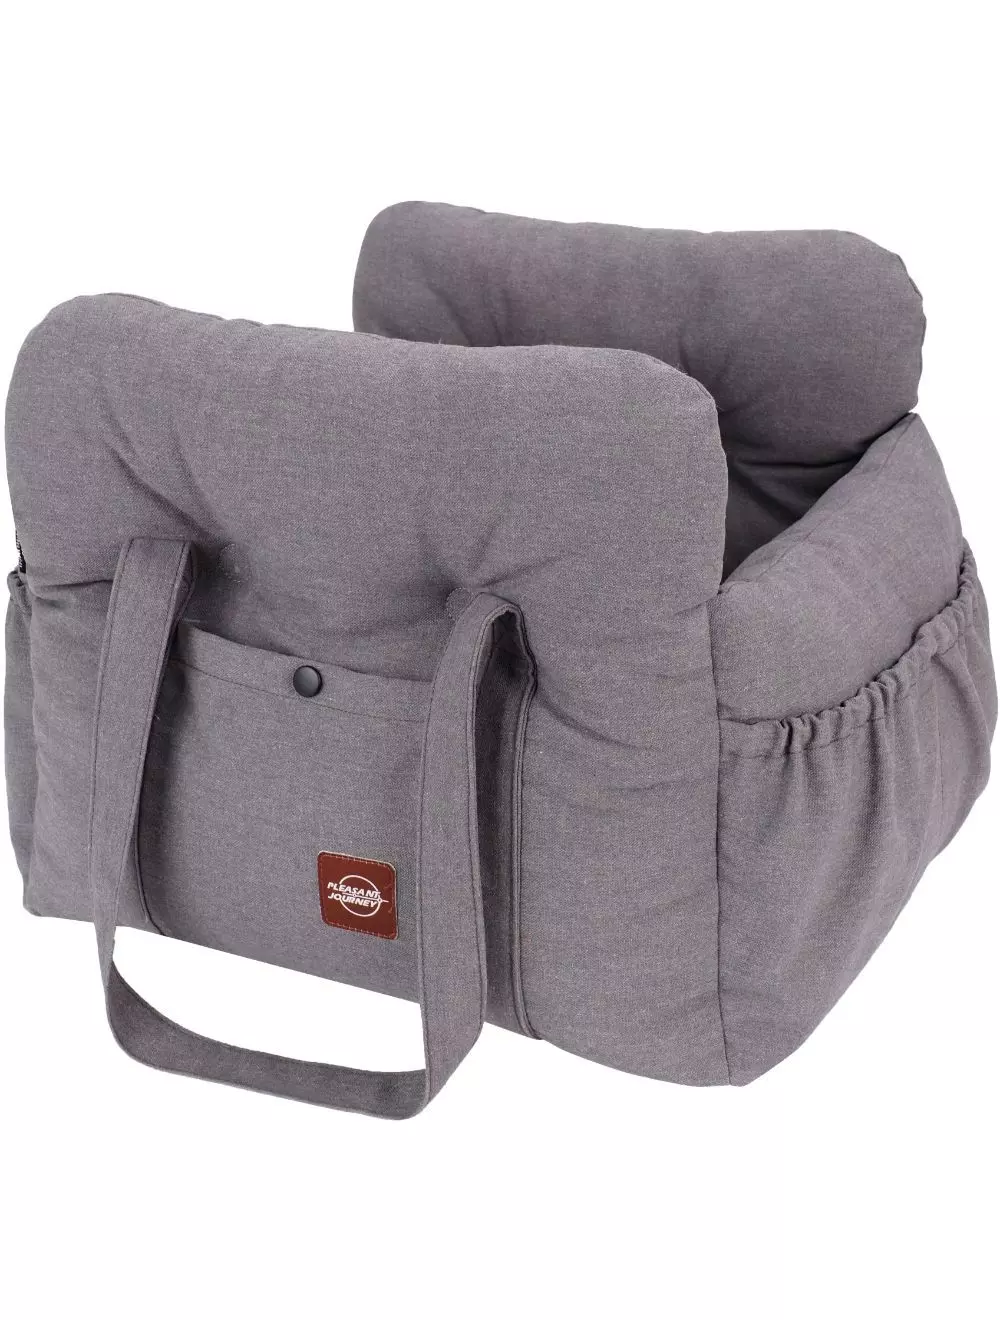 Peppy Buddies Comfort Dog Seat For